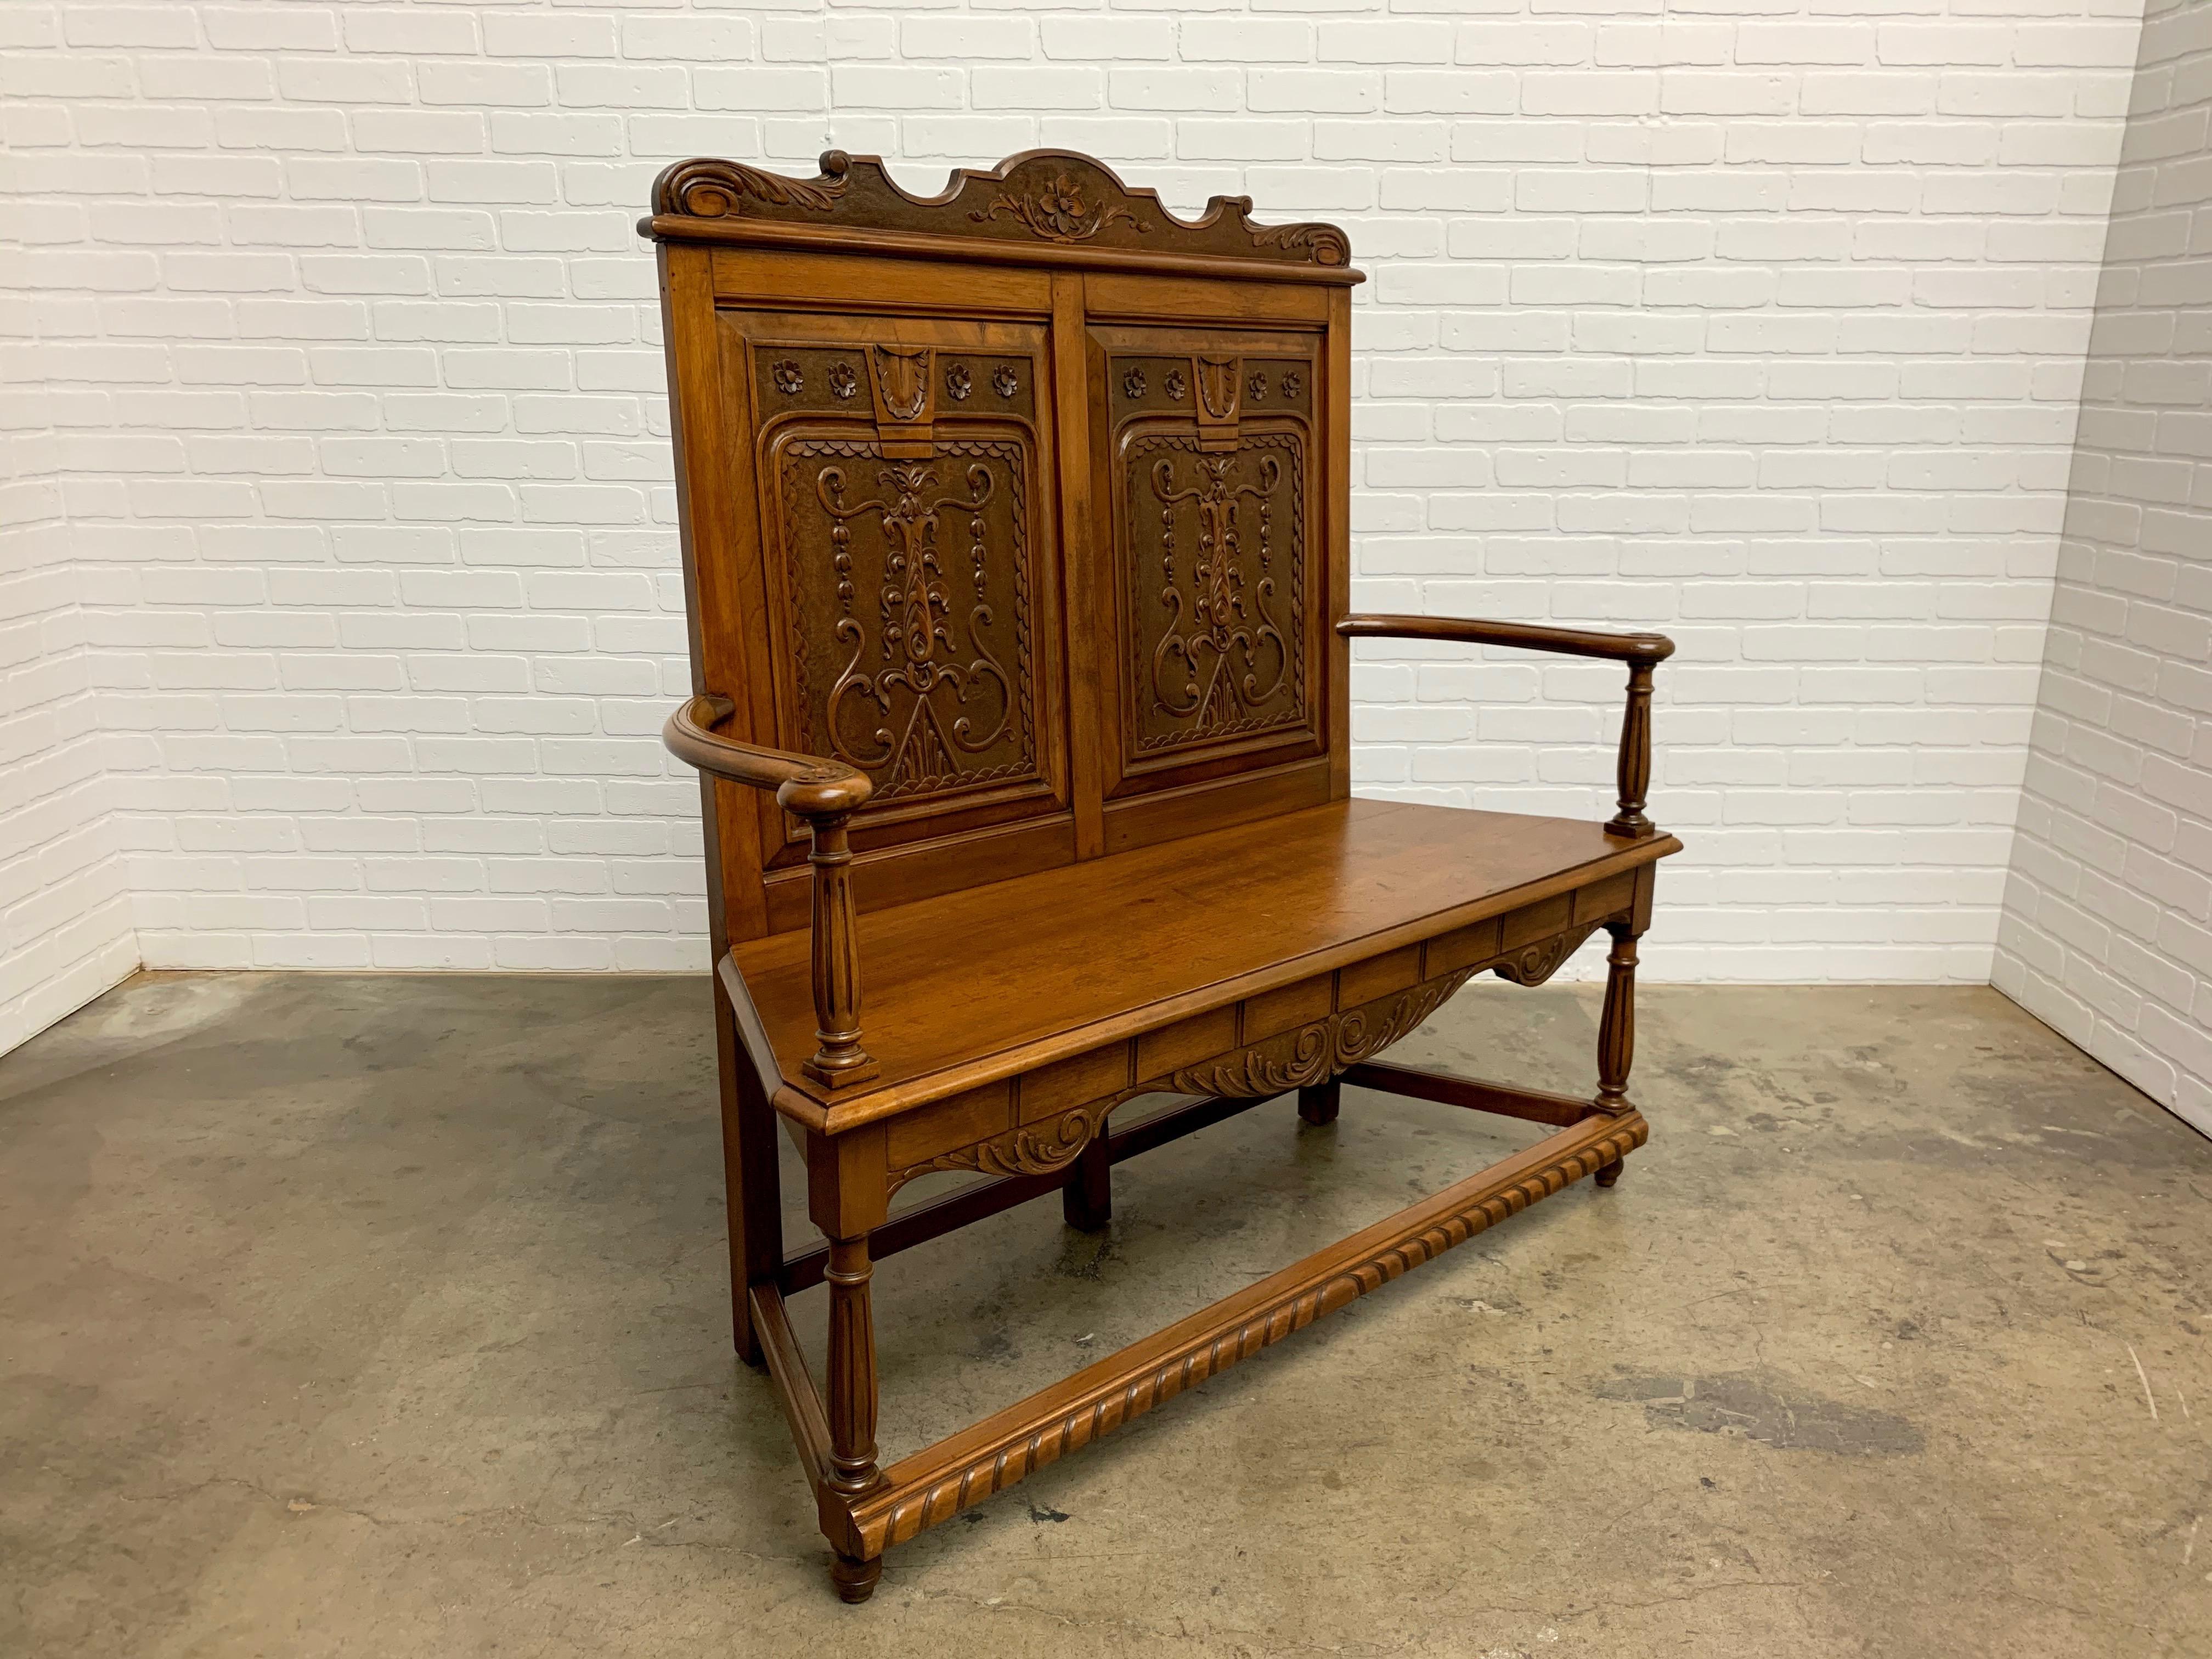 Solid Italian fruitwood and hand carved settle with fluted legs.